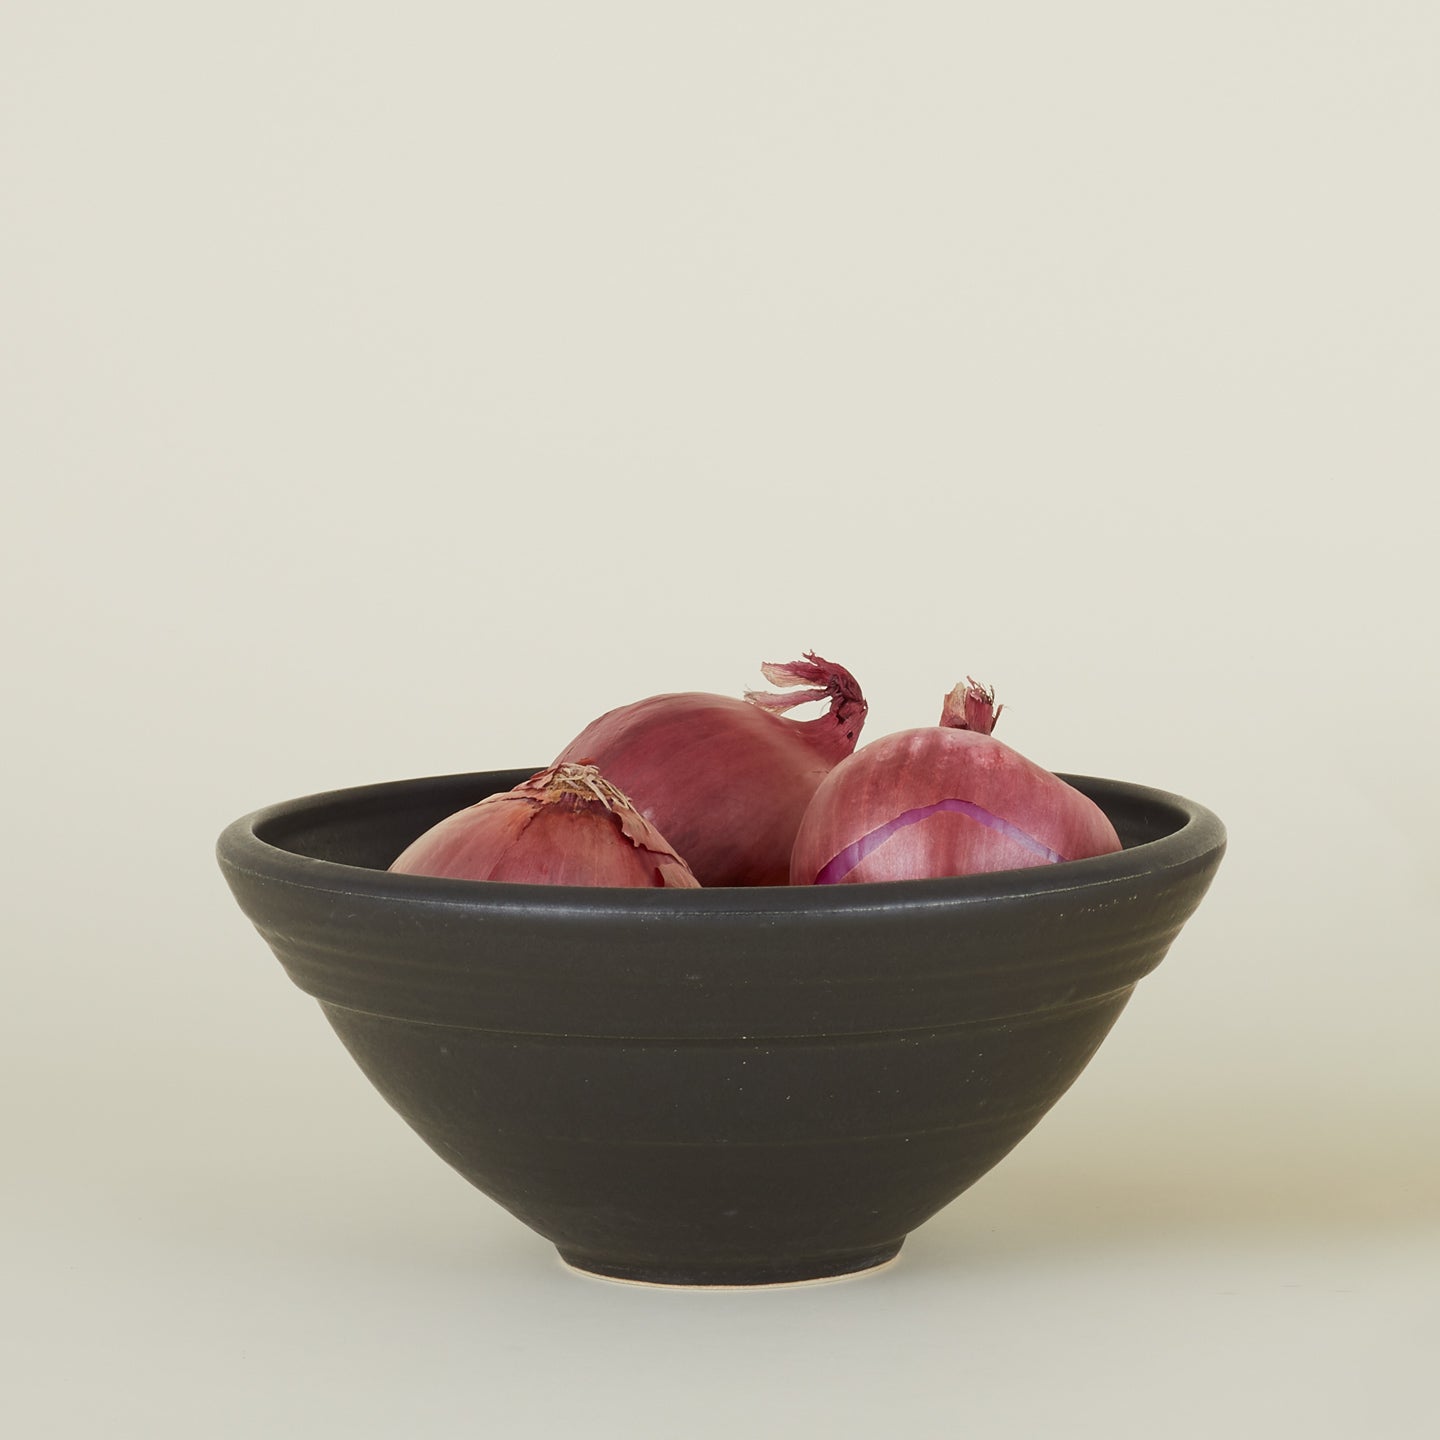 Stoneware Serving Bowl in Black, filled with red onions.